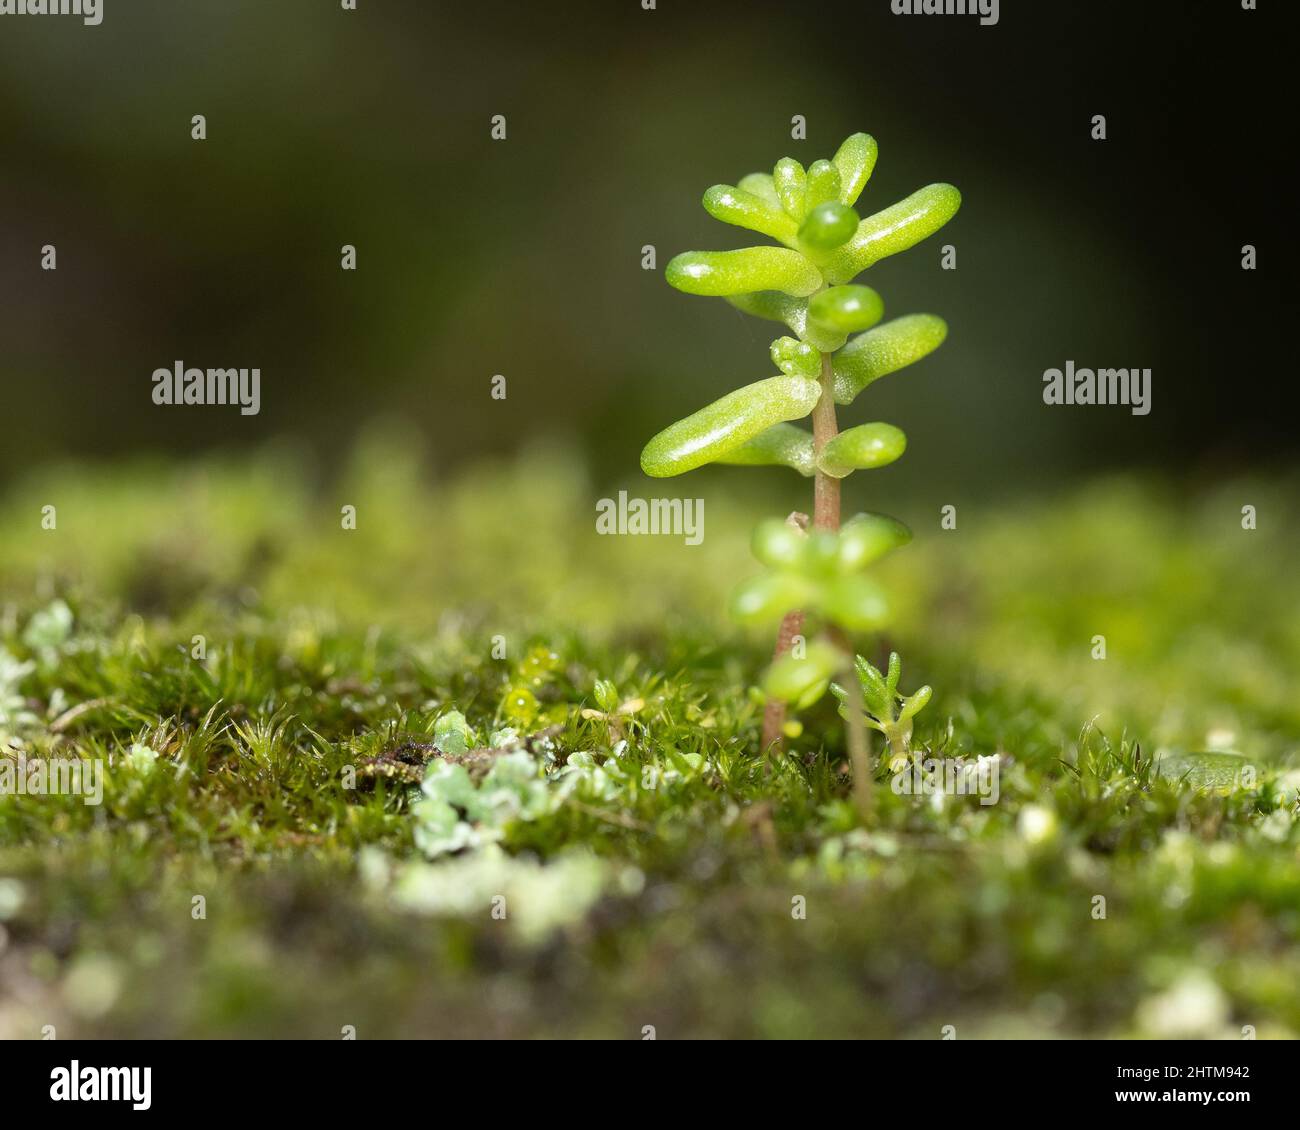 Closeup of a small pigmyweed (Crassula) growing on a mossy ground with a blurry background Stock Photo